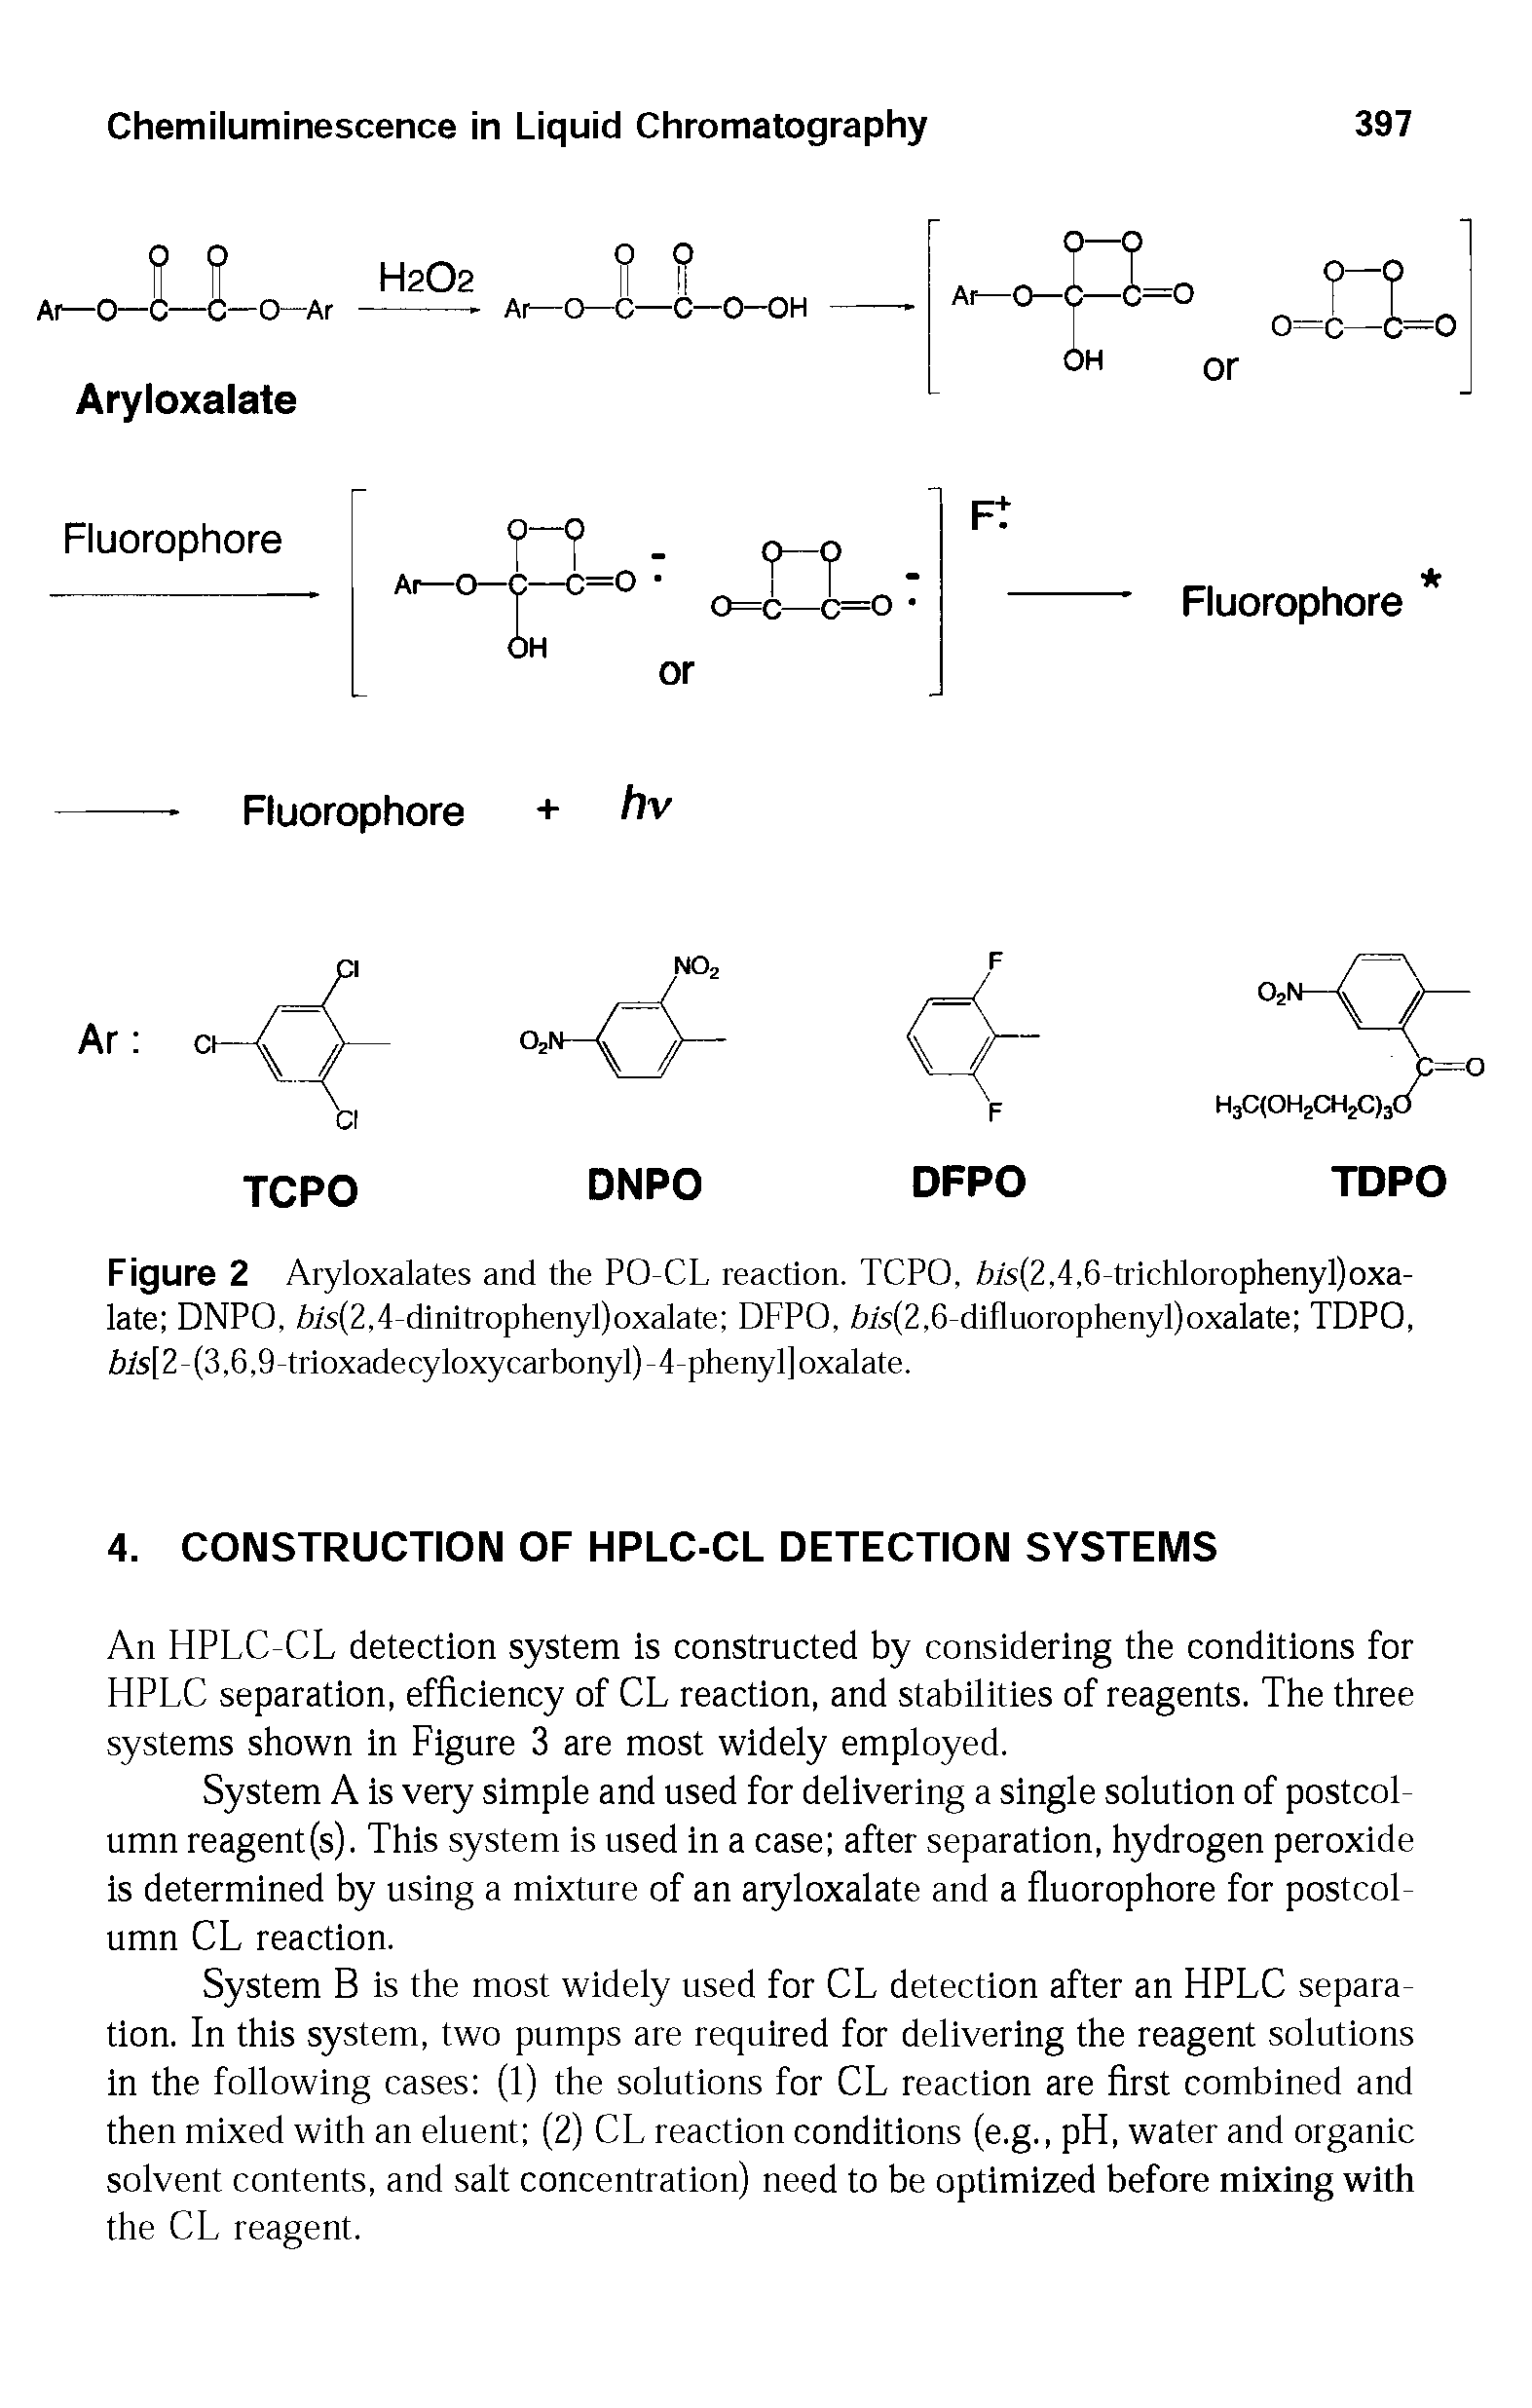 Figure 2 Aryloxalates and the PO-CL reaction. TCPO, 6is(2,4,6-trichlorophenyl)oxa-late DNPO, fa s(2,4-dinitrophenyl) oxalate DFPO, 6is(2,6-difluorophenyl)oxalate TDPO, bis[2 (3,6,9-trioxadecyloxycarbonyl)-4-phenyl] oxalate.